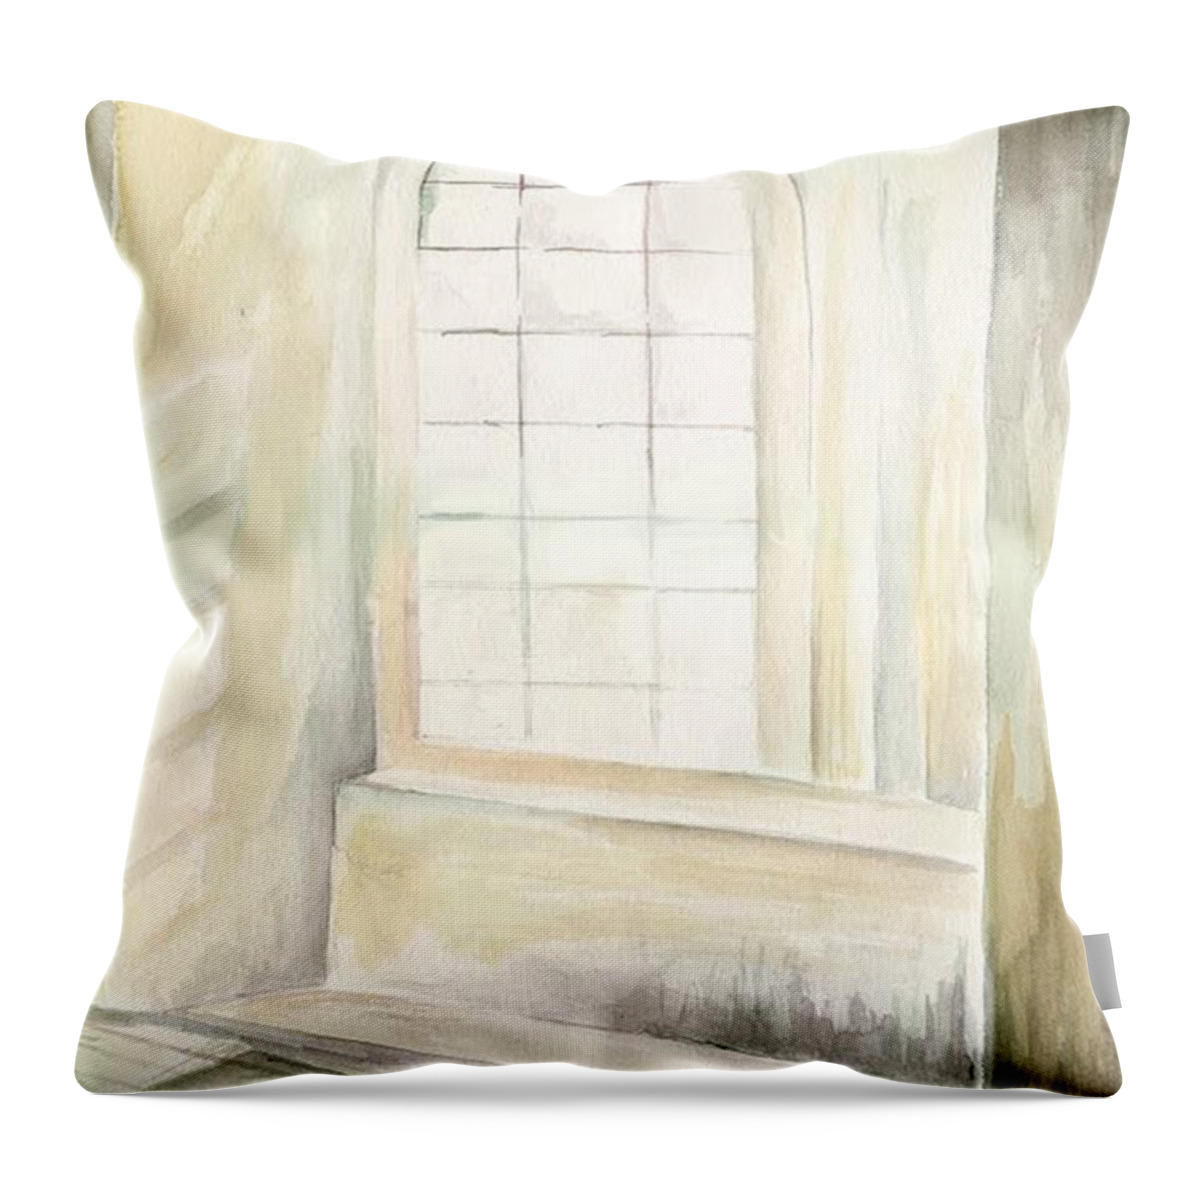 Sunlight Throw Pillow featuring the painting Window by Darren Cannell